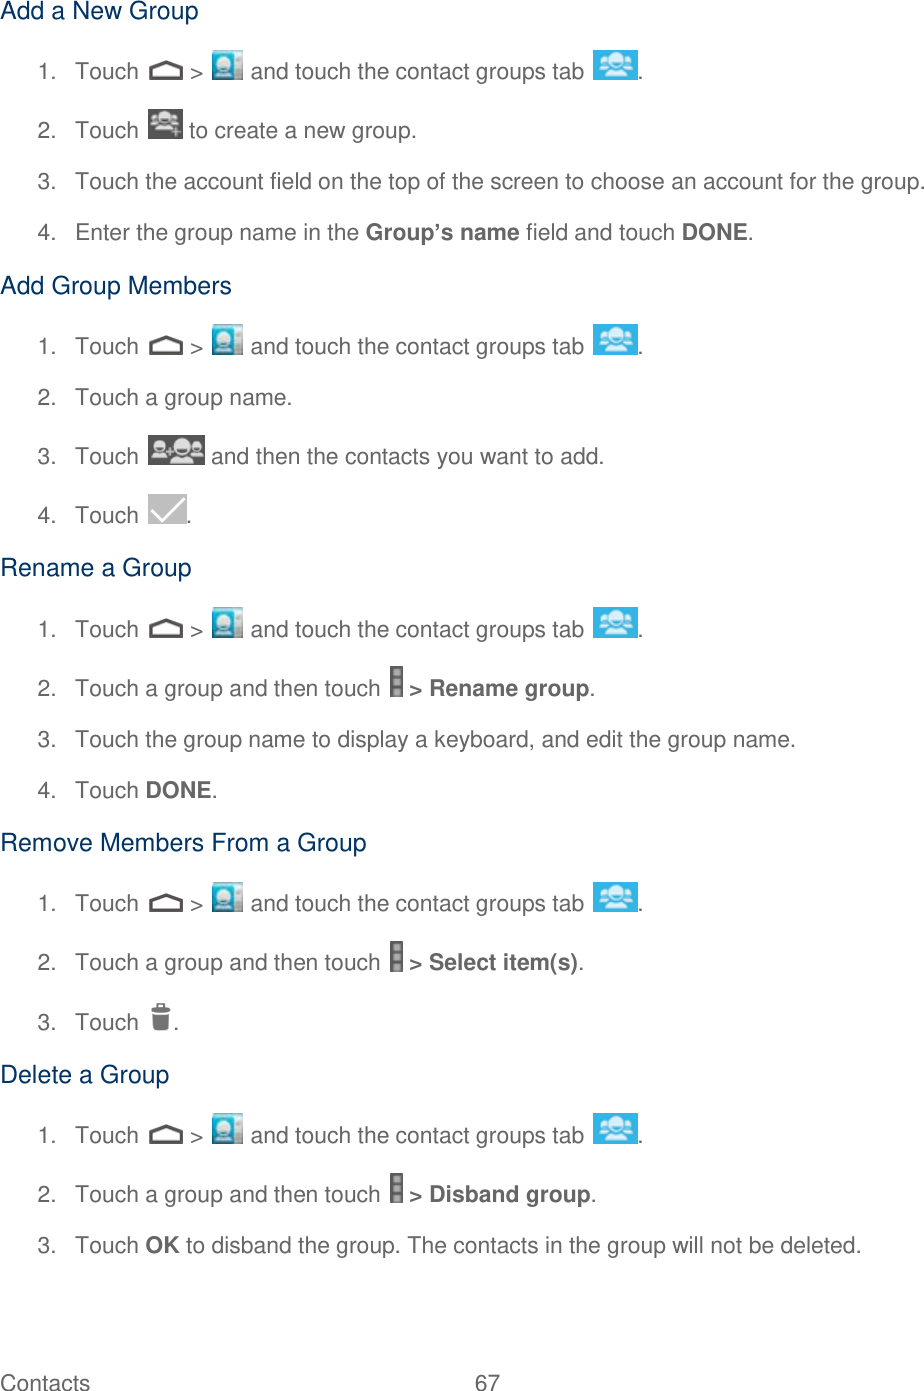 Contacts  67   Add a New Group 1.  Touch   &gt;   and touch the contact groups tab  . 2.  Touch   to create a new group. 3.  Touch the account field on the top of the screen to choose an account for the group. 4.  Enter the group name in the Group’s name field and touch DONE. Add Group Members 1.  Touch   &gt;   and touch the contact groups tab  . 2.  Touch a group name. 3.  Touch   and then the contacts you want to add. 4.  Touch  . Rename a Group 1.  Touch   &gt;   and touch the contact groups tab  . 2.  Touch a group and then touch   &gt; Rename group. 3.  Touch the group name to display a keyboard, and edit the group name.  4.  Touch DONE. Remove Members From a Group 1.  Touch   &gt;   and touch the contact groups tab  . 2.  Touch a group and then touch   &gt; Select item(s). 3.  Touch  . Delete a Group 1.  Touch   &gt;   and touch the contact groups tab  . 2.  Touch a group and then touch   &gt; Disband group. 3.  Touch OK to disband the group. The contacts in the group will not be deleted. 